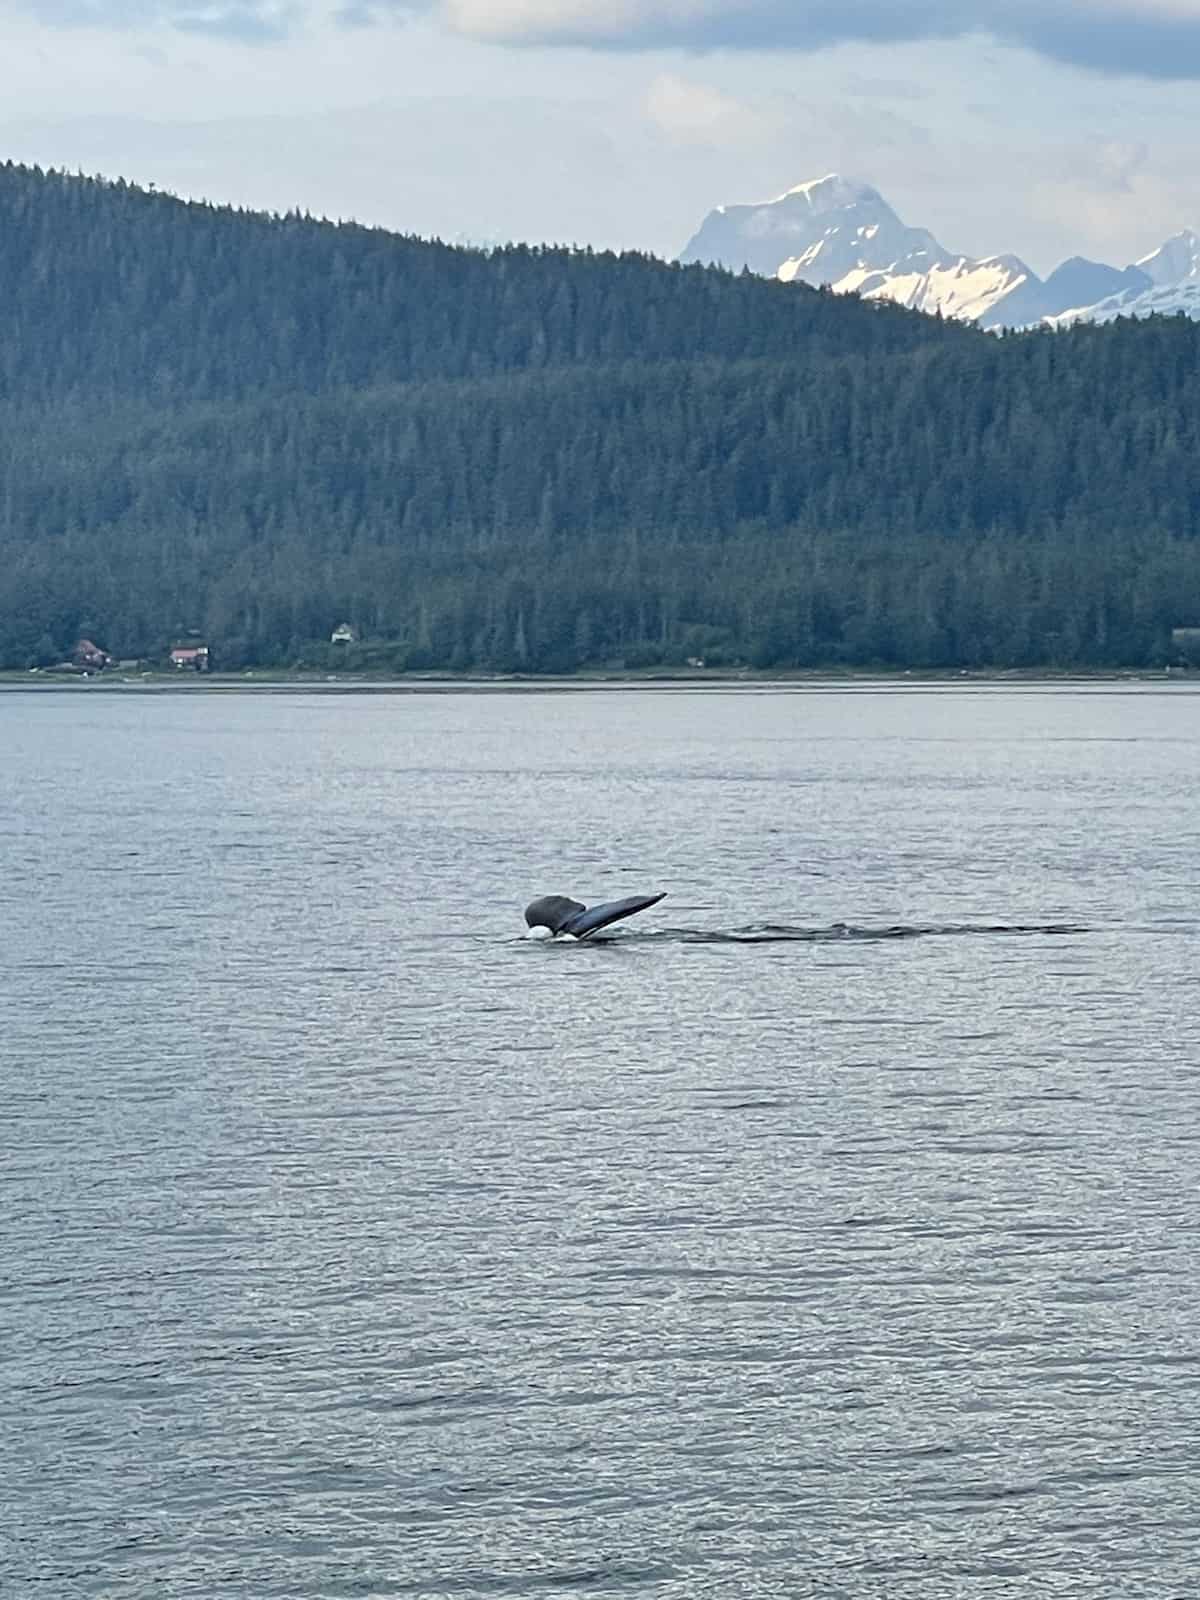 Whale tail in the bay in Alaska.